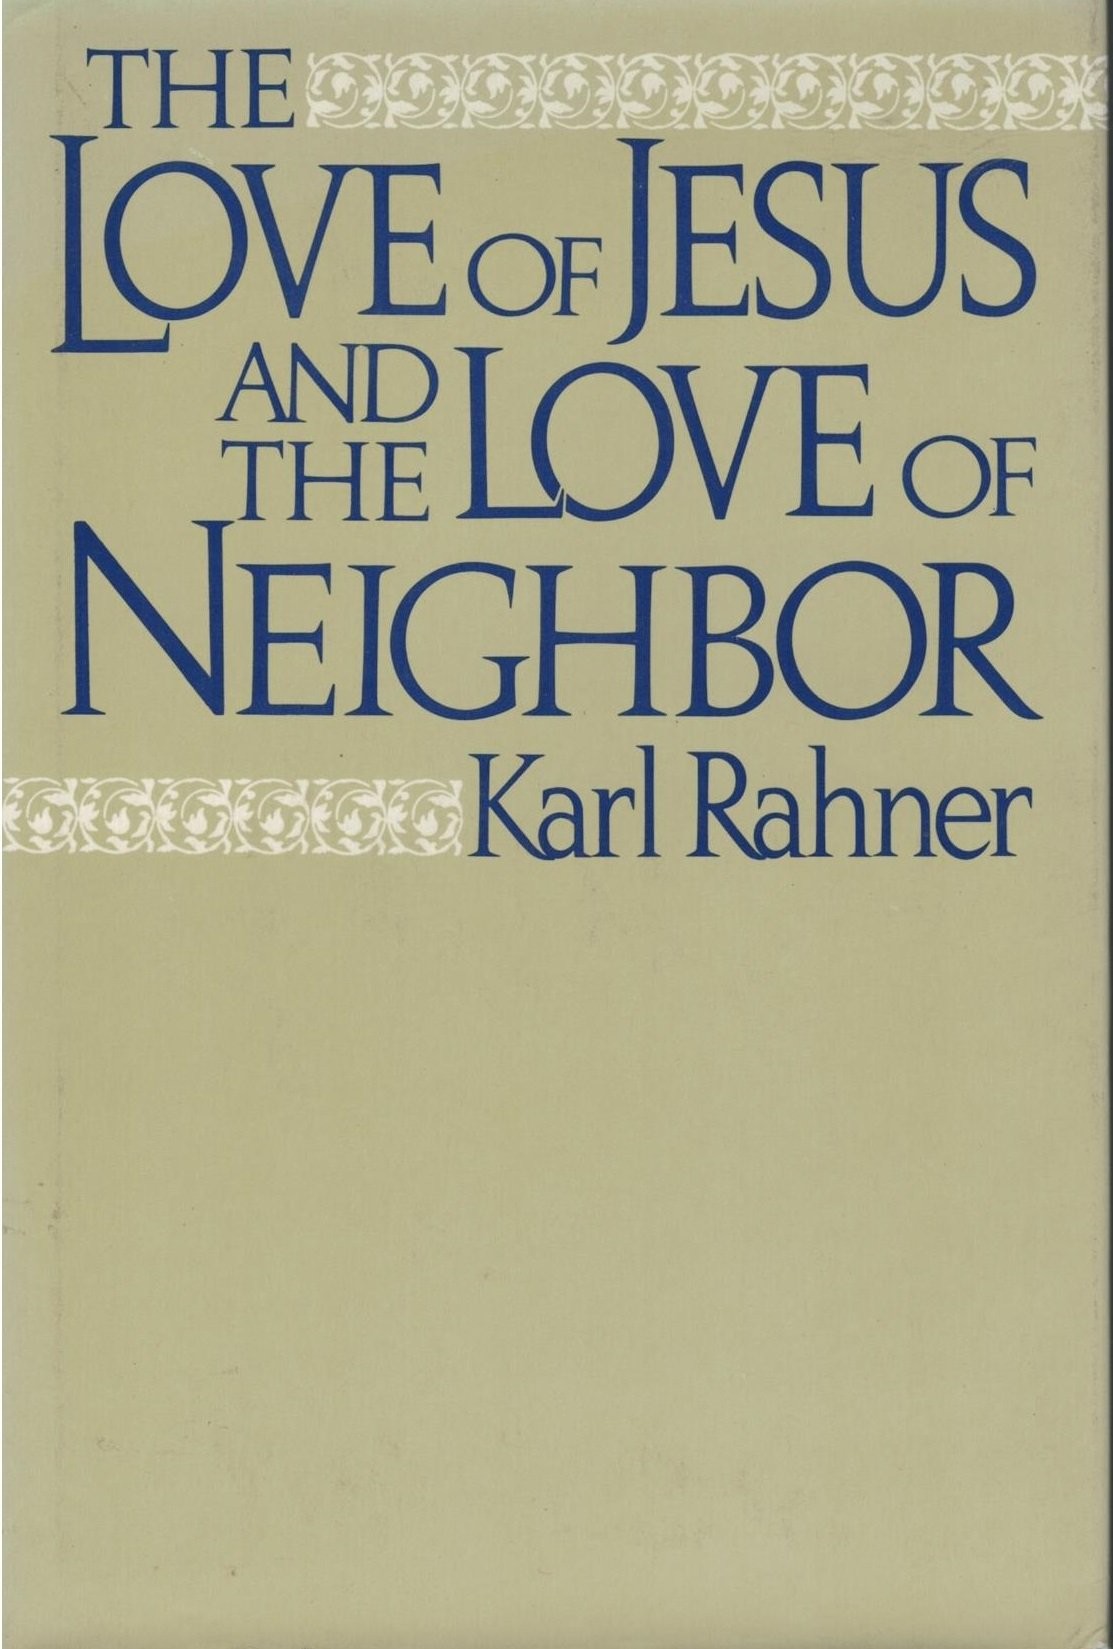 The Love of Jesus and the Love of Neighbor